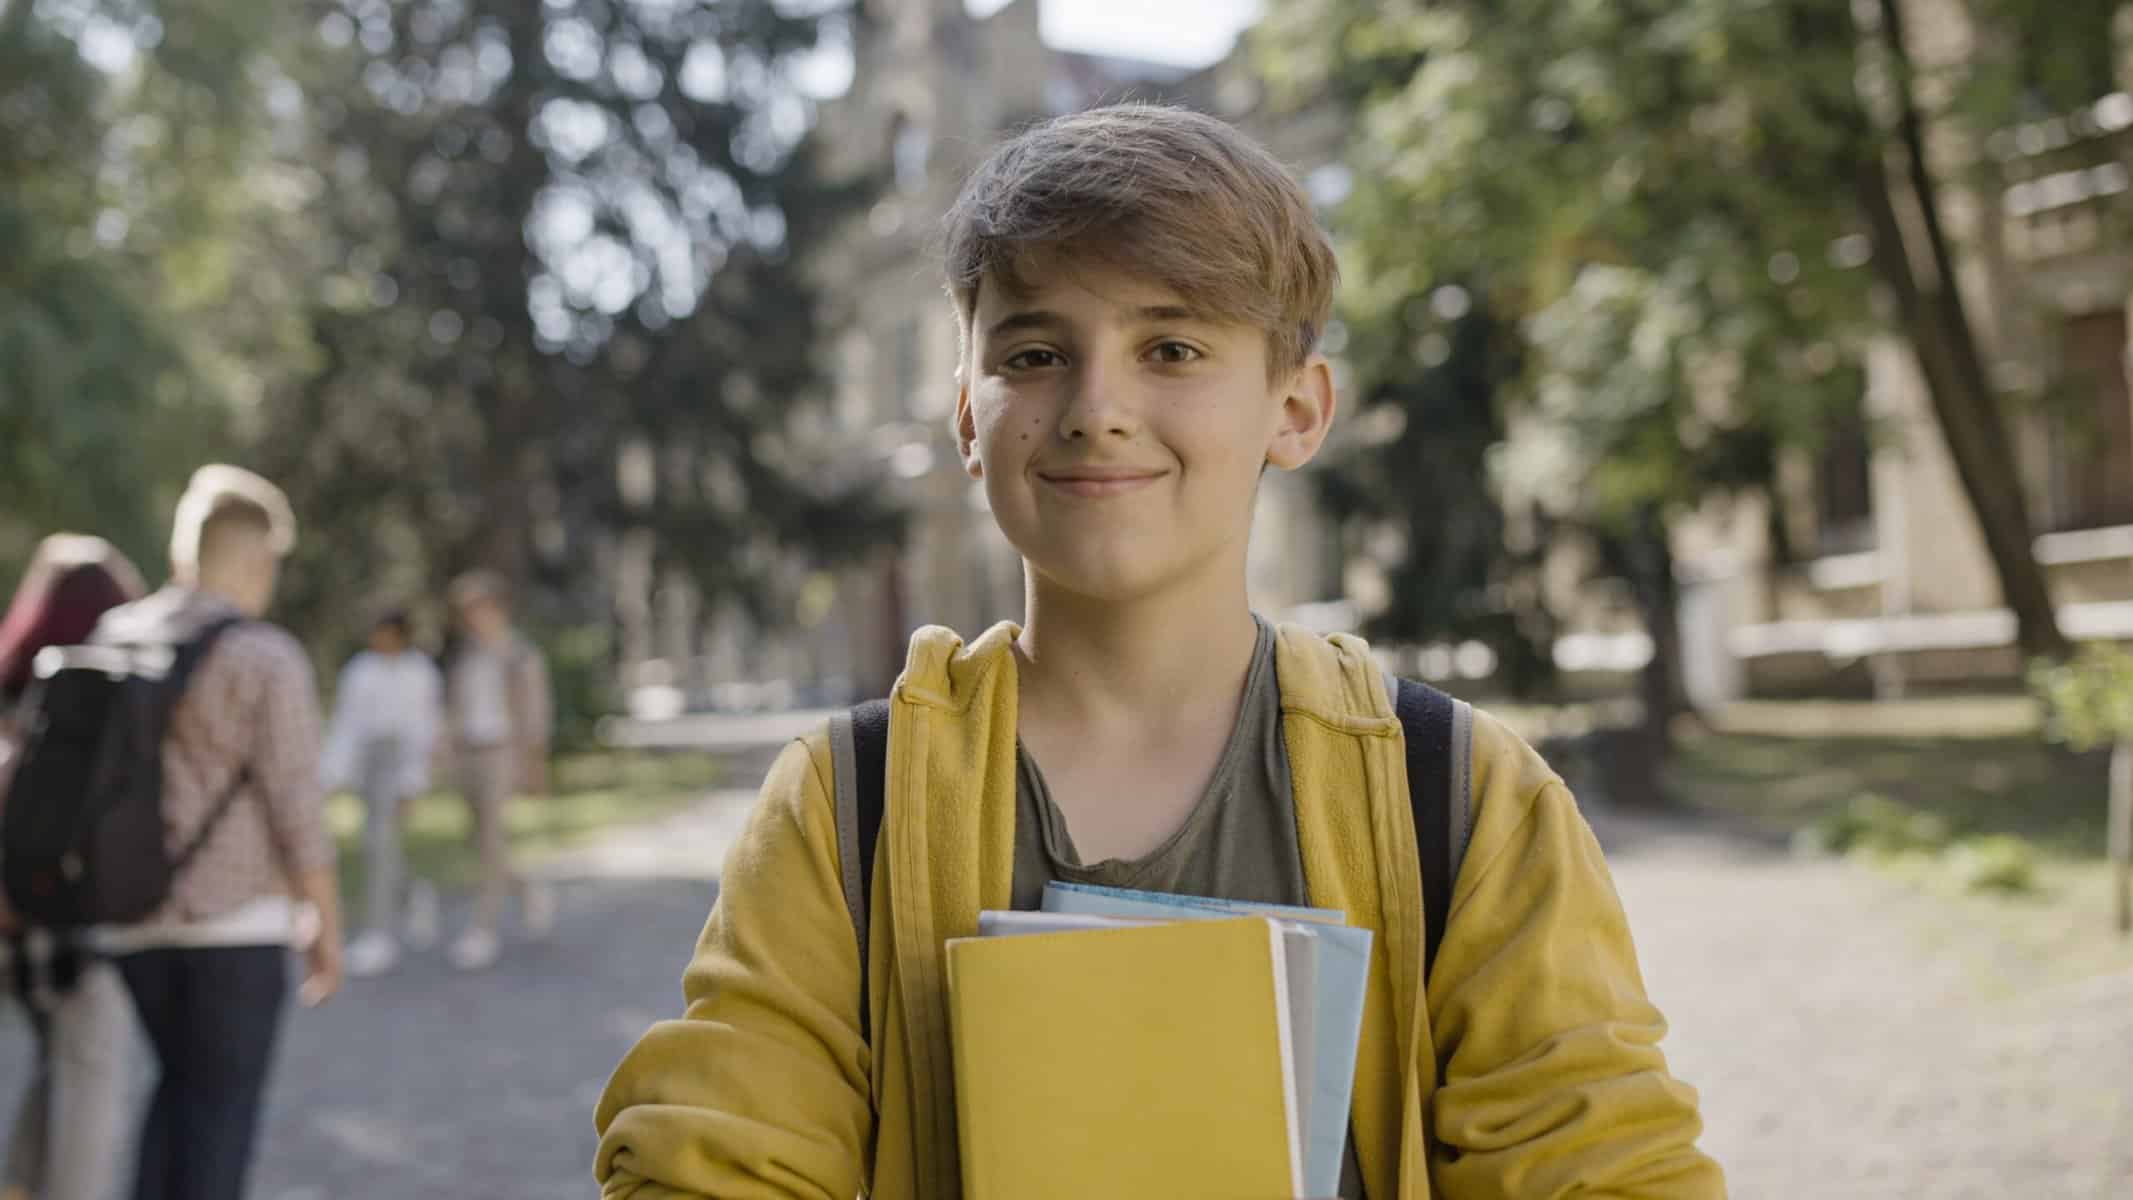 Middle school boy holding a notebook and smiling